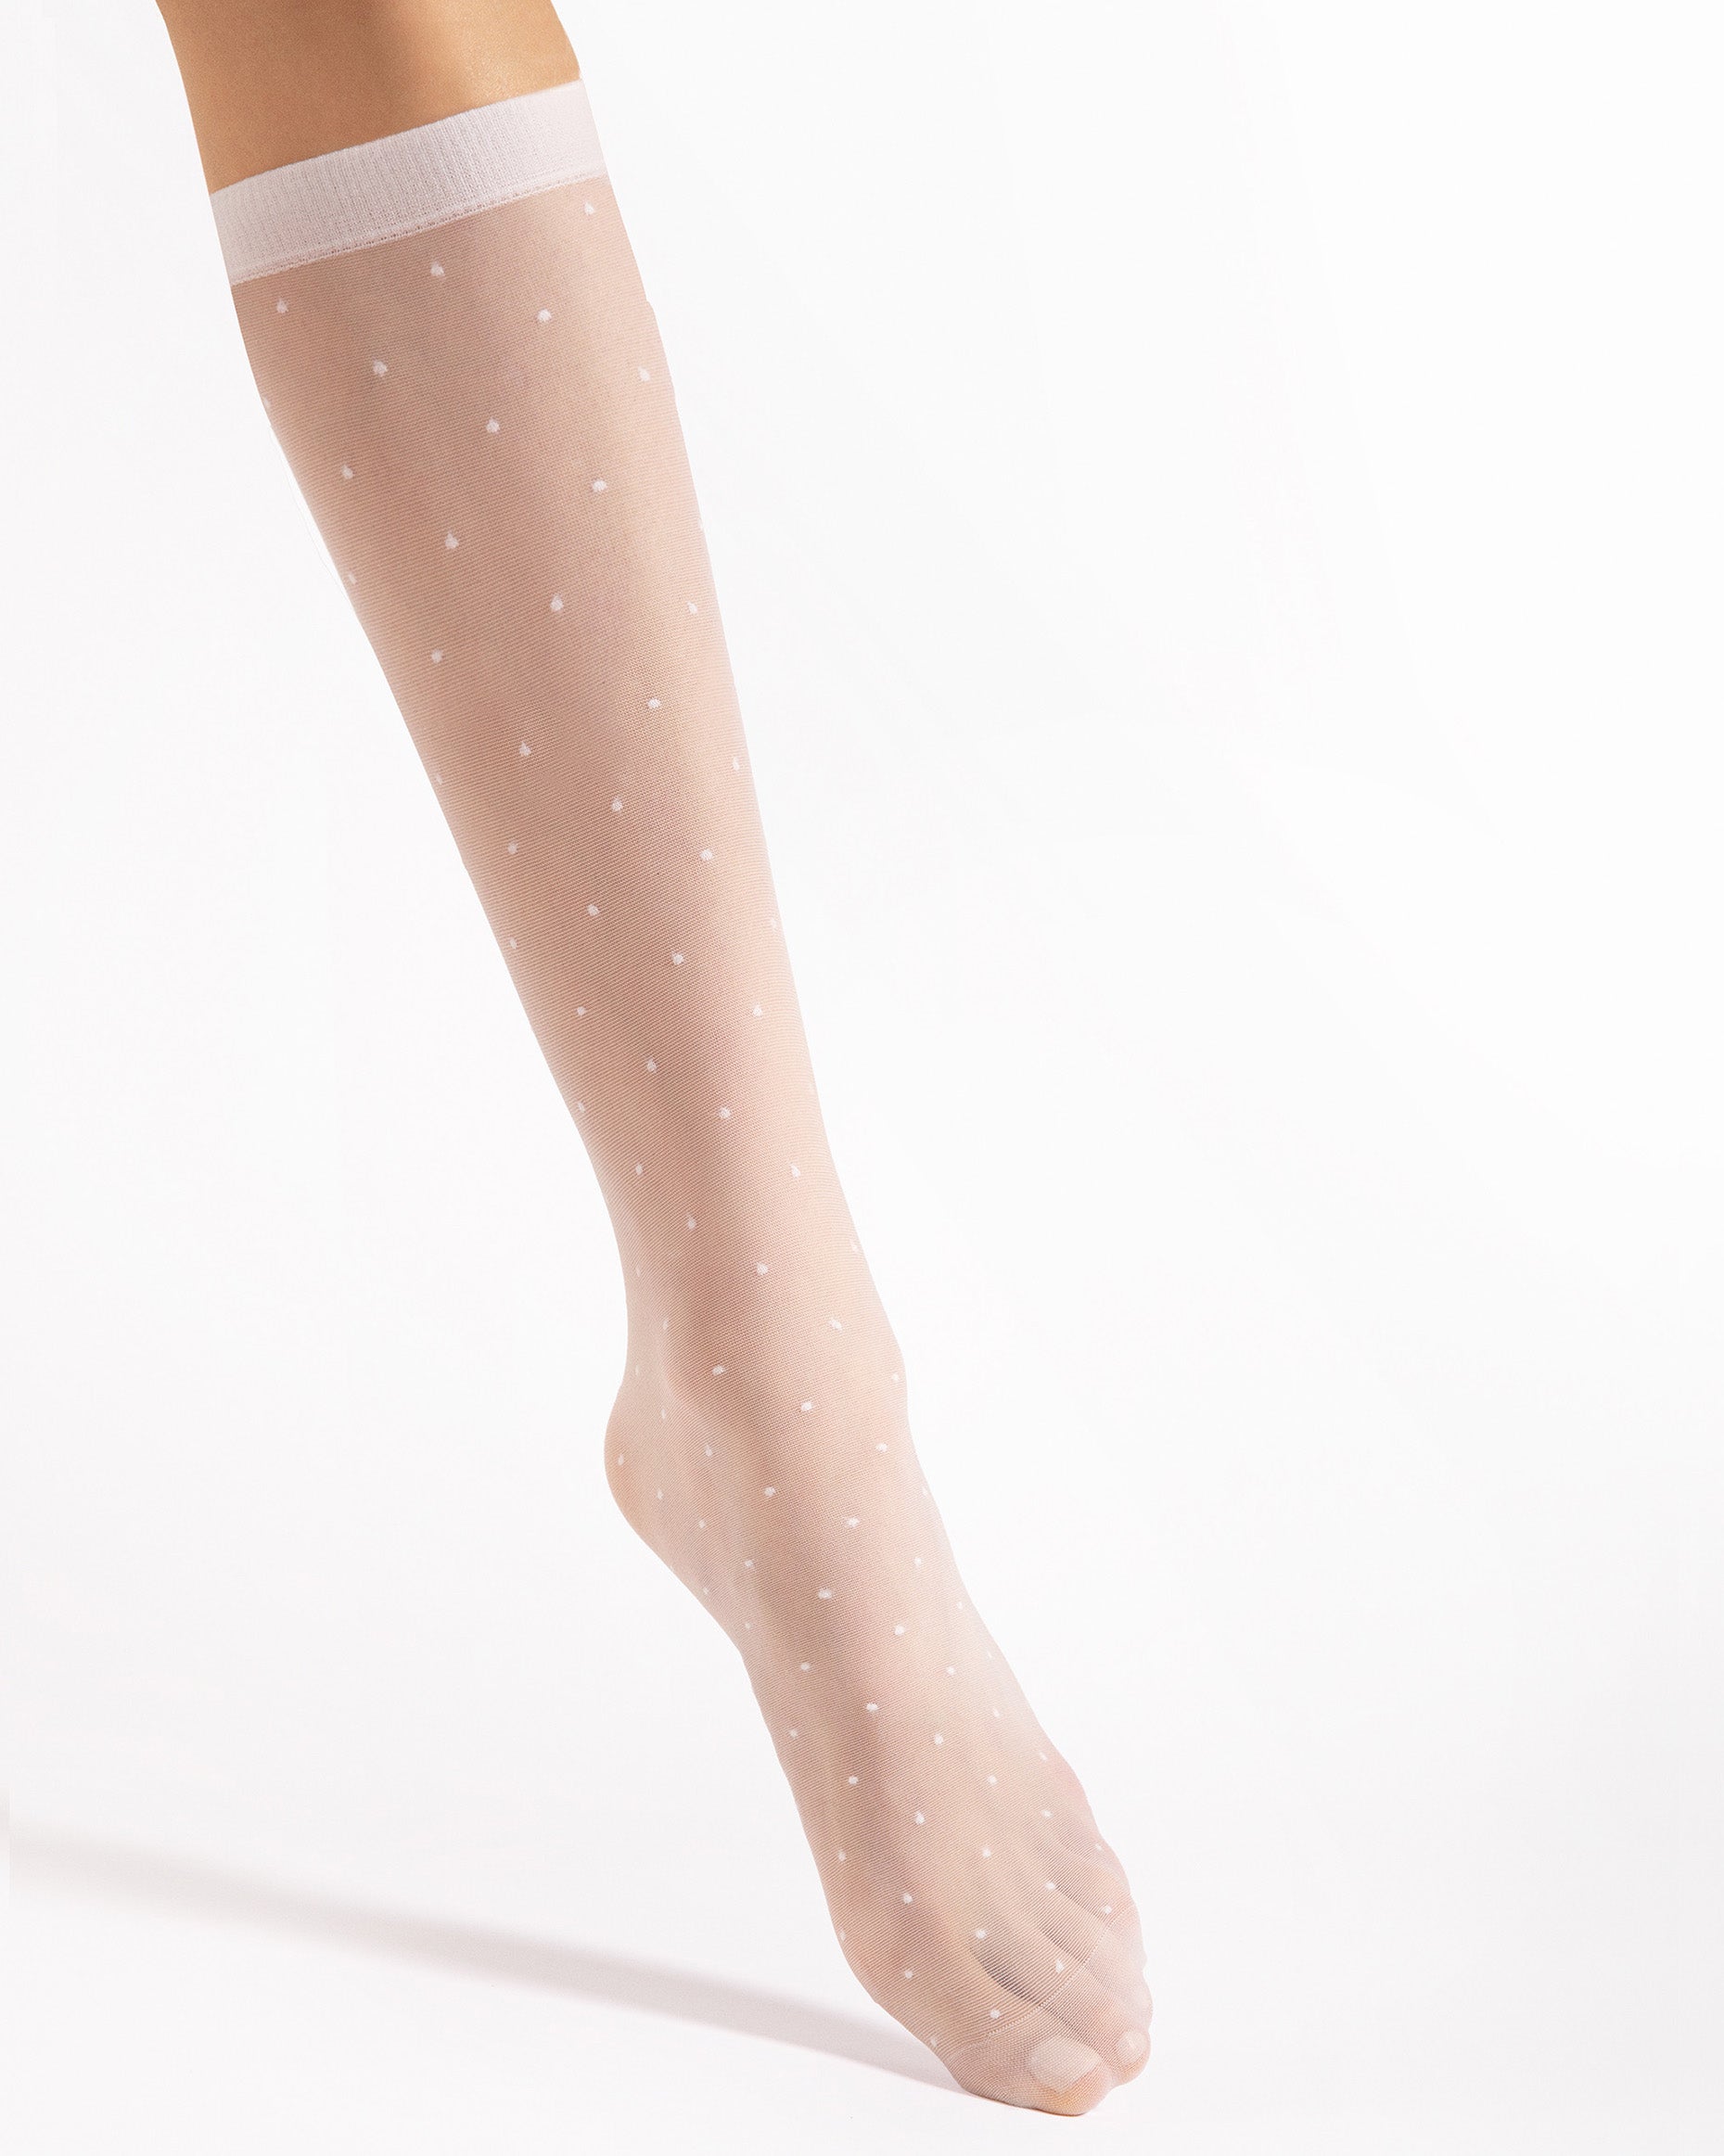 Fiore Quebec 15 Den - Sheer white fashion knee-high socks with a small polka dot pattern, plain elasticated cuff and sheer reinforced toe.